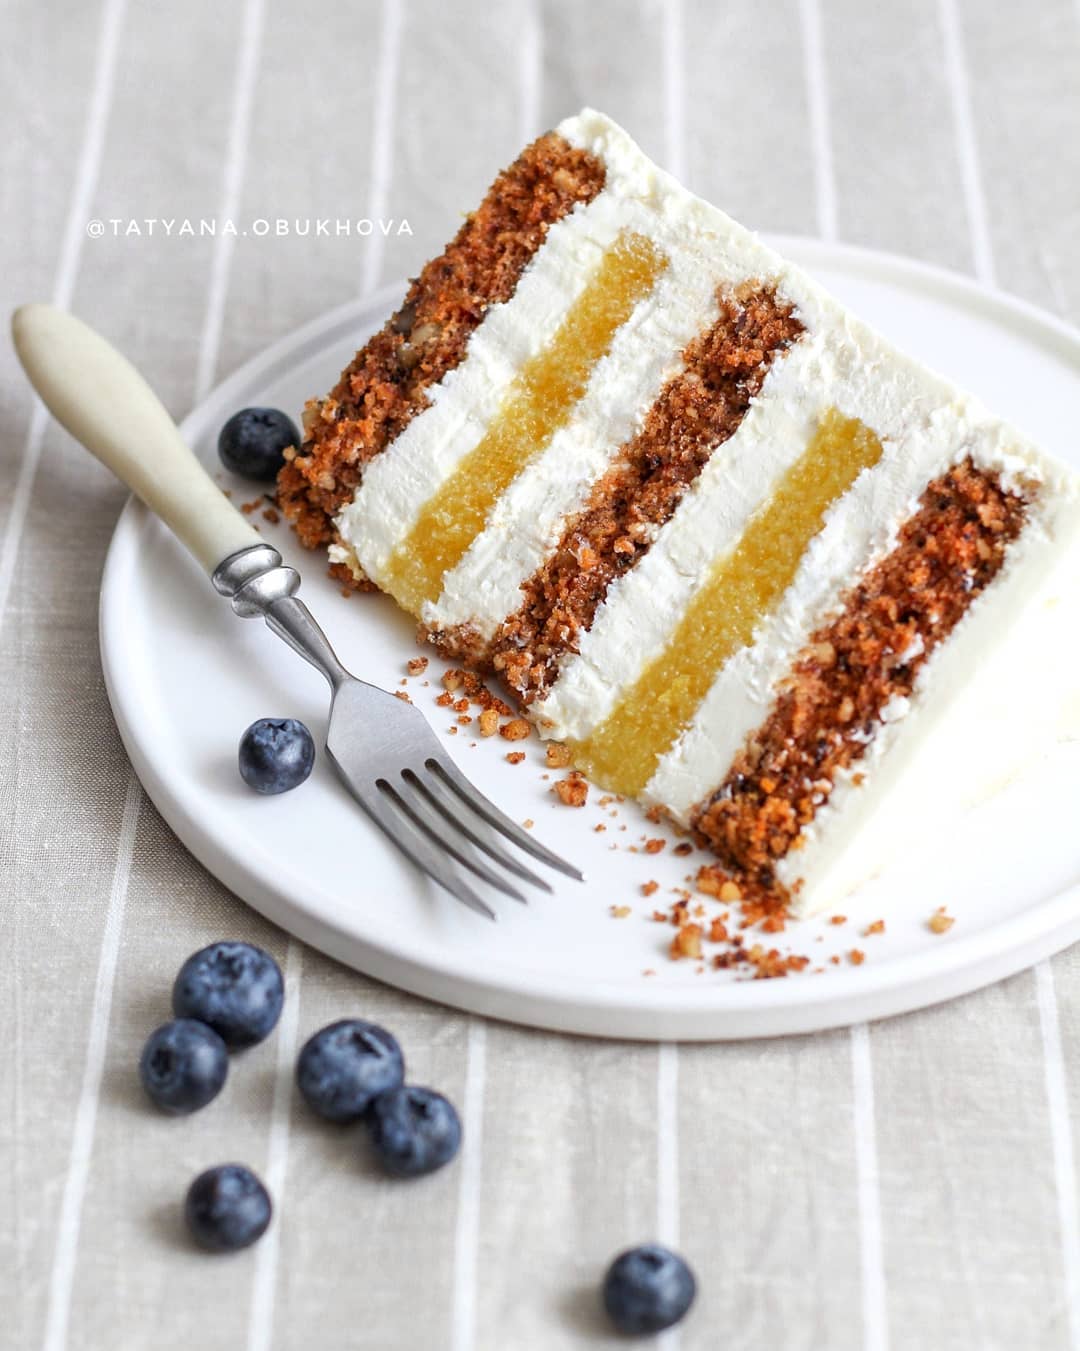 Carrot cake with apricots